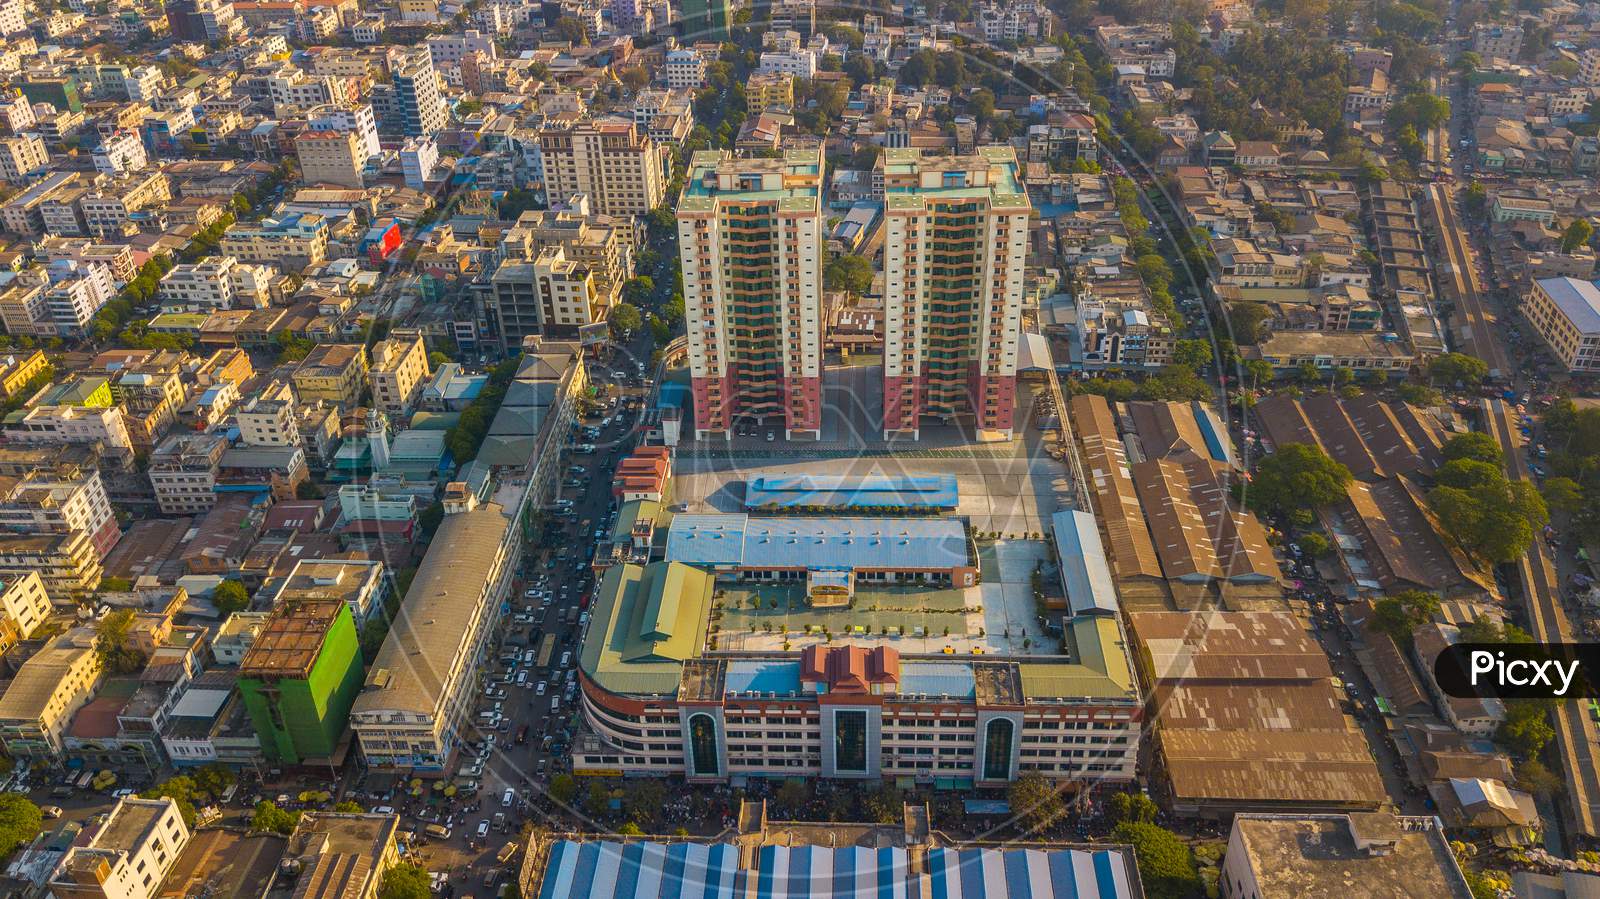 Mandalay is a second largest city of Myanmar(Burma).